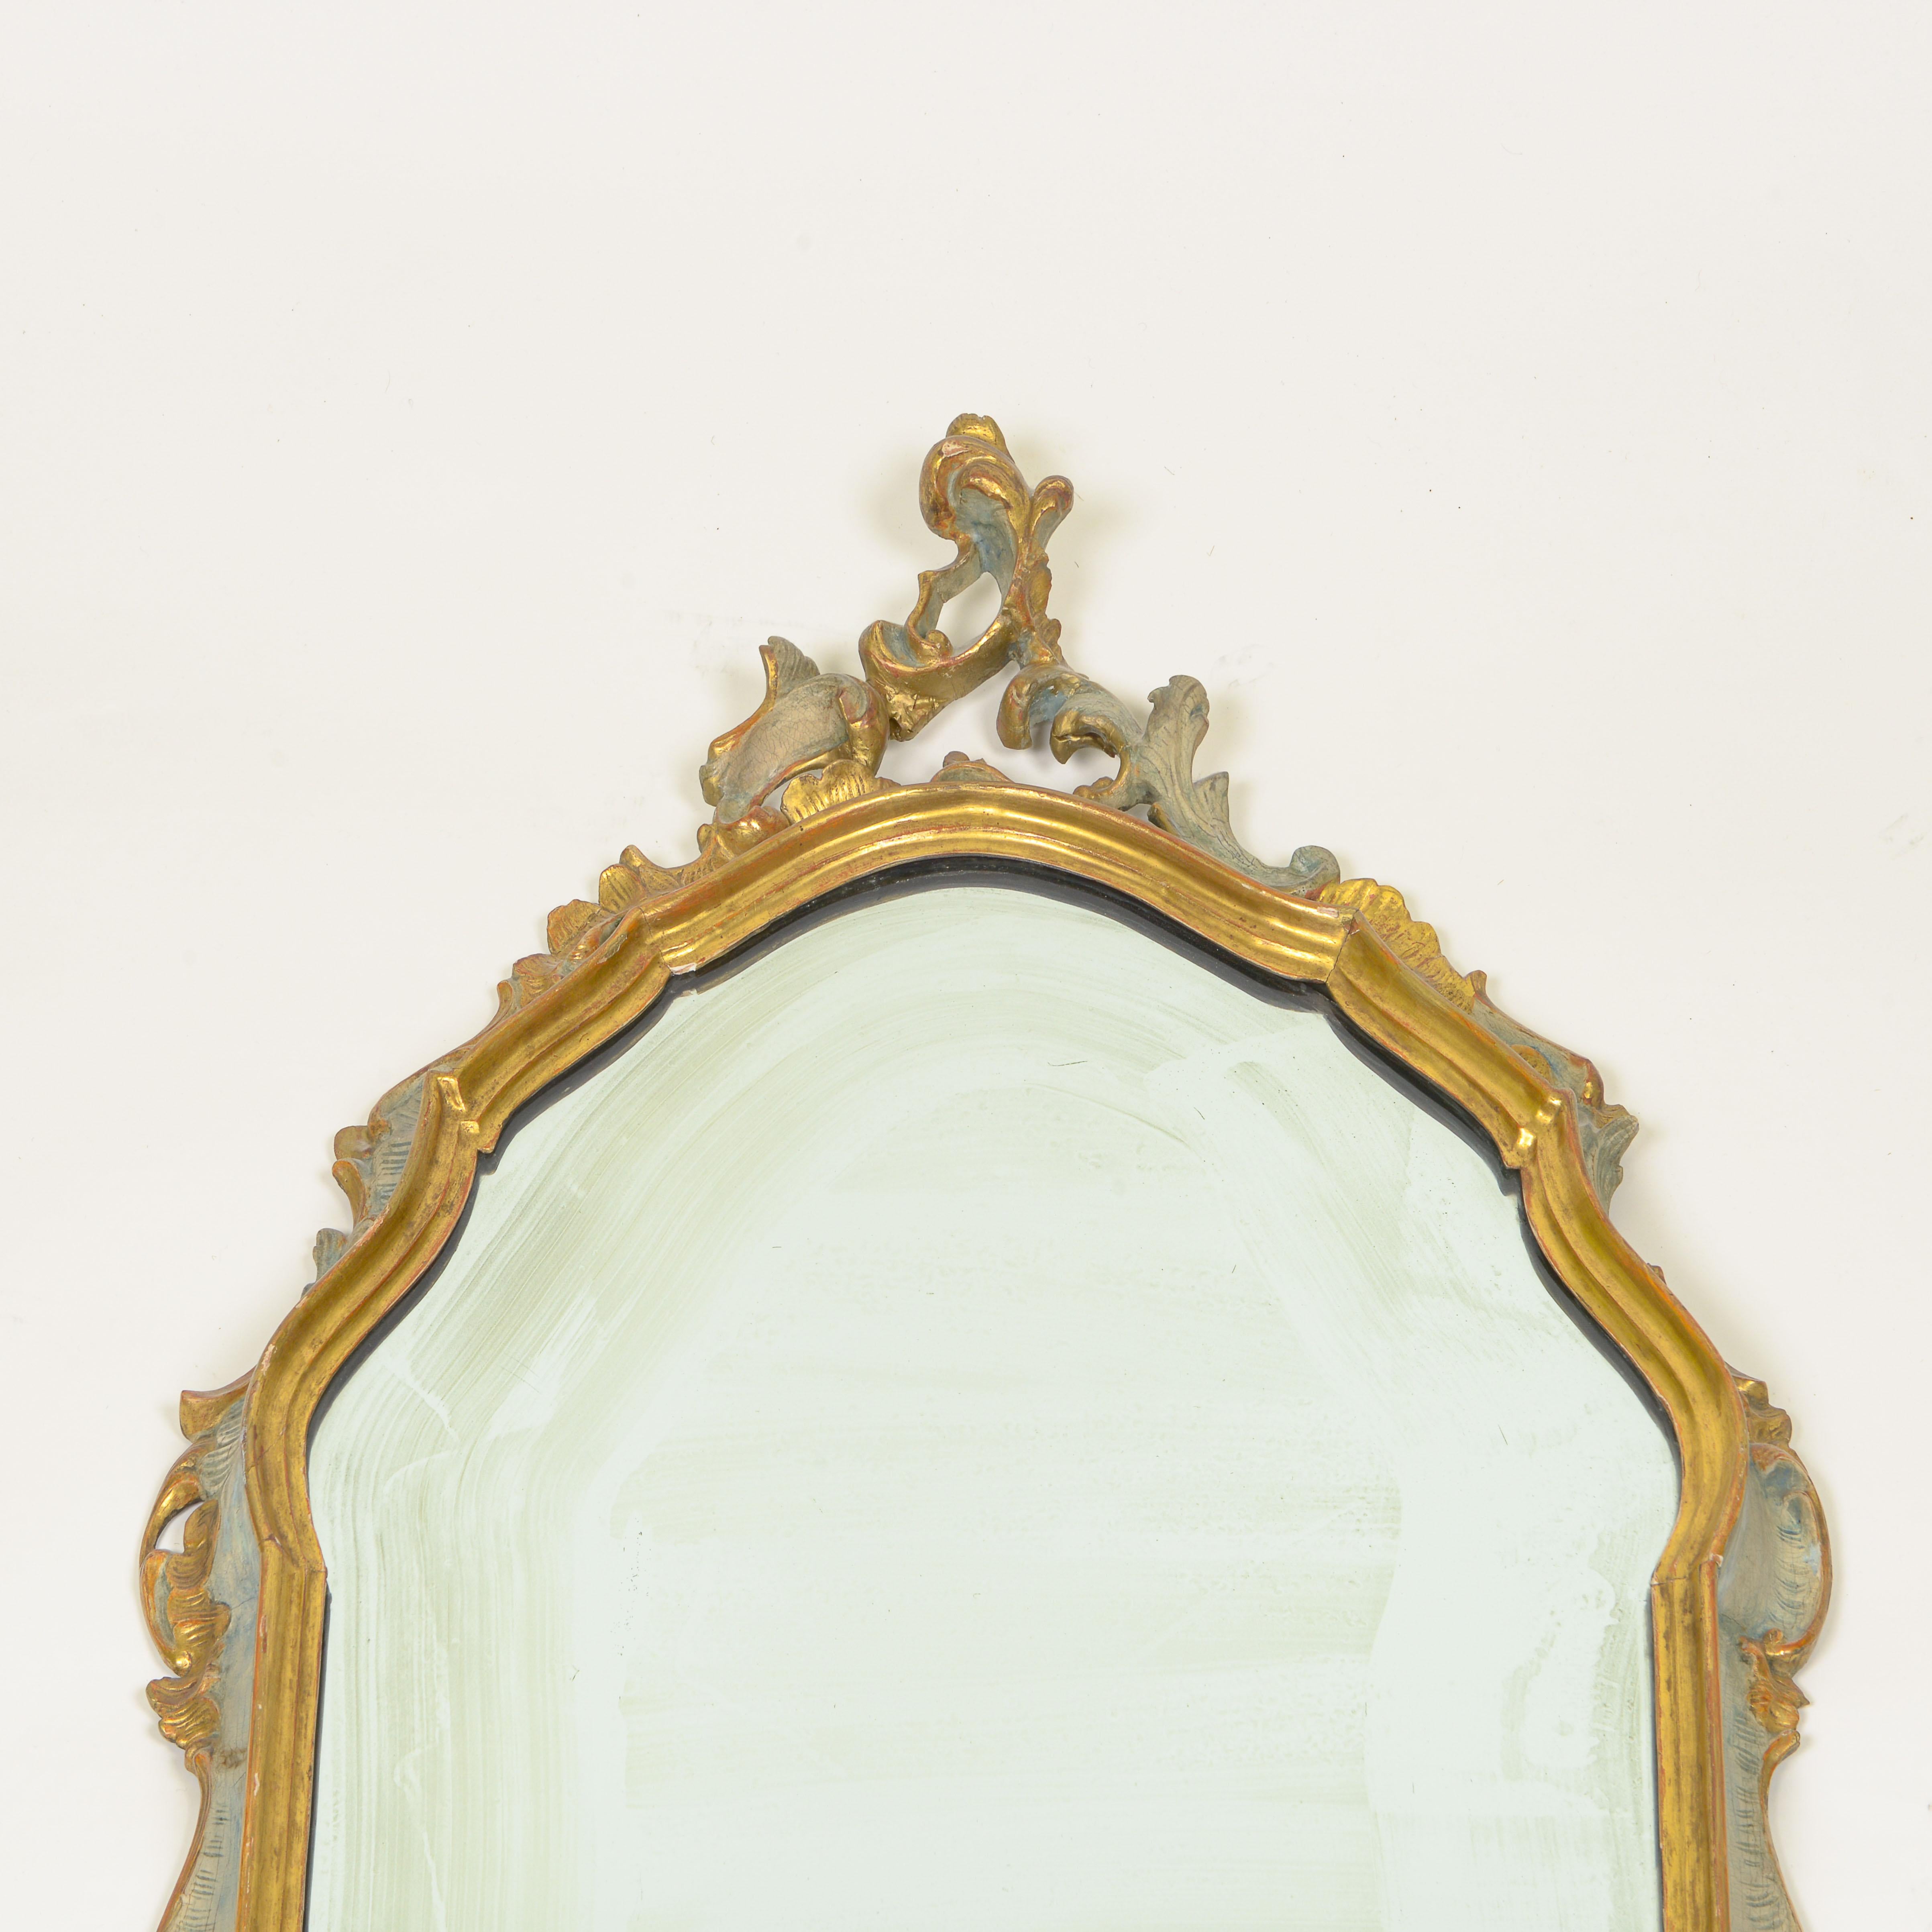 The mirror plate of cartouche form within a conforming surround carved with rocaille decoration.